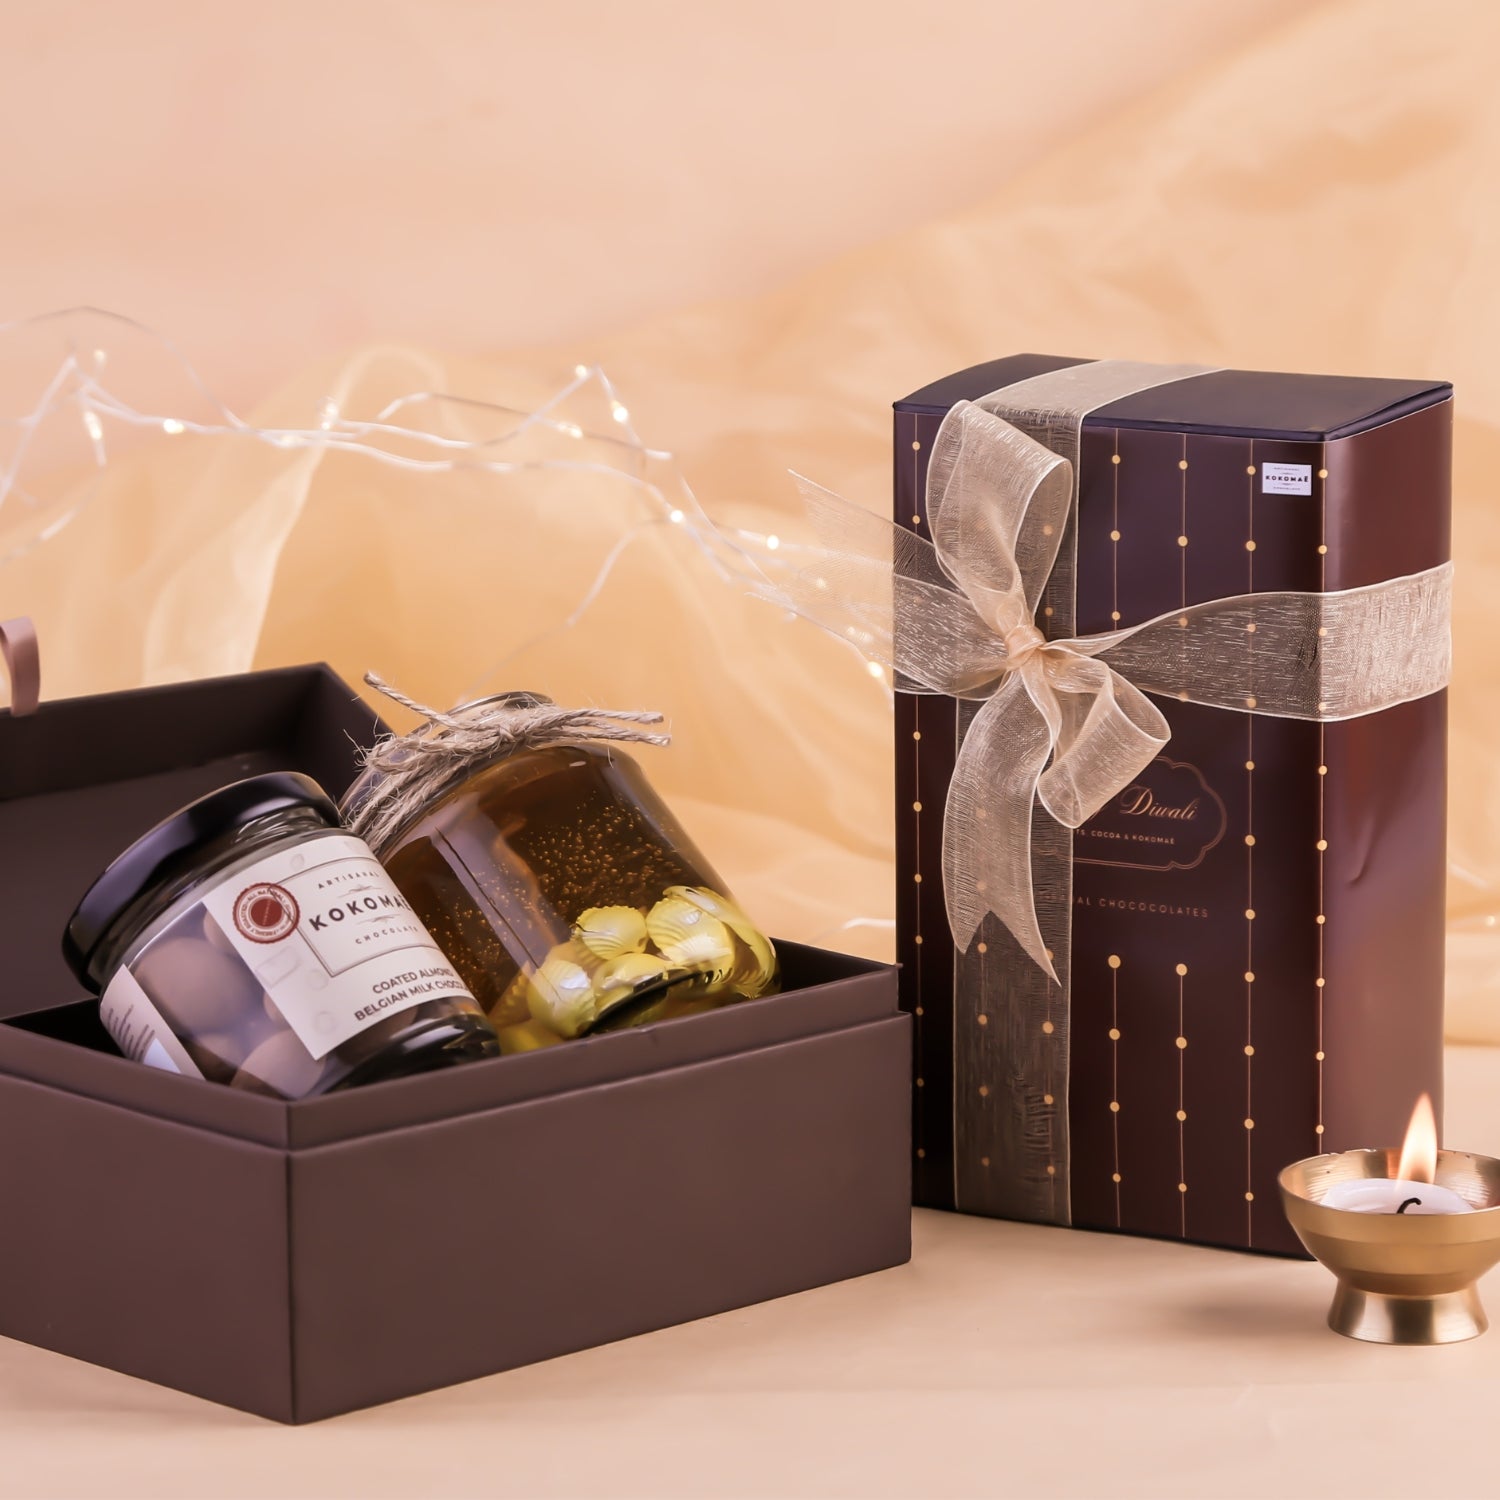 Kokomaē Premium Coated Almond in Smooth Chocolate & a Candle for Diwali